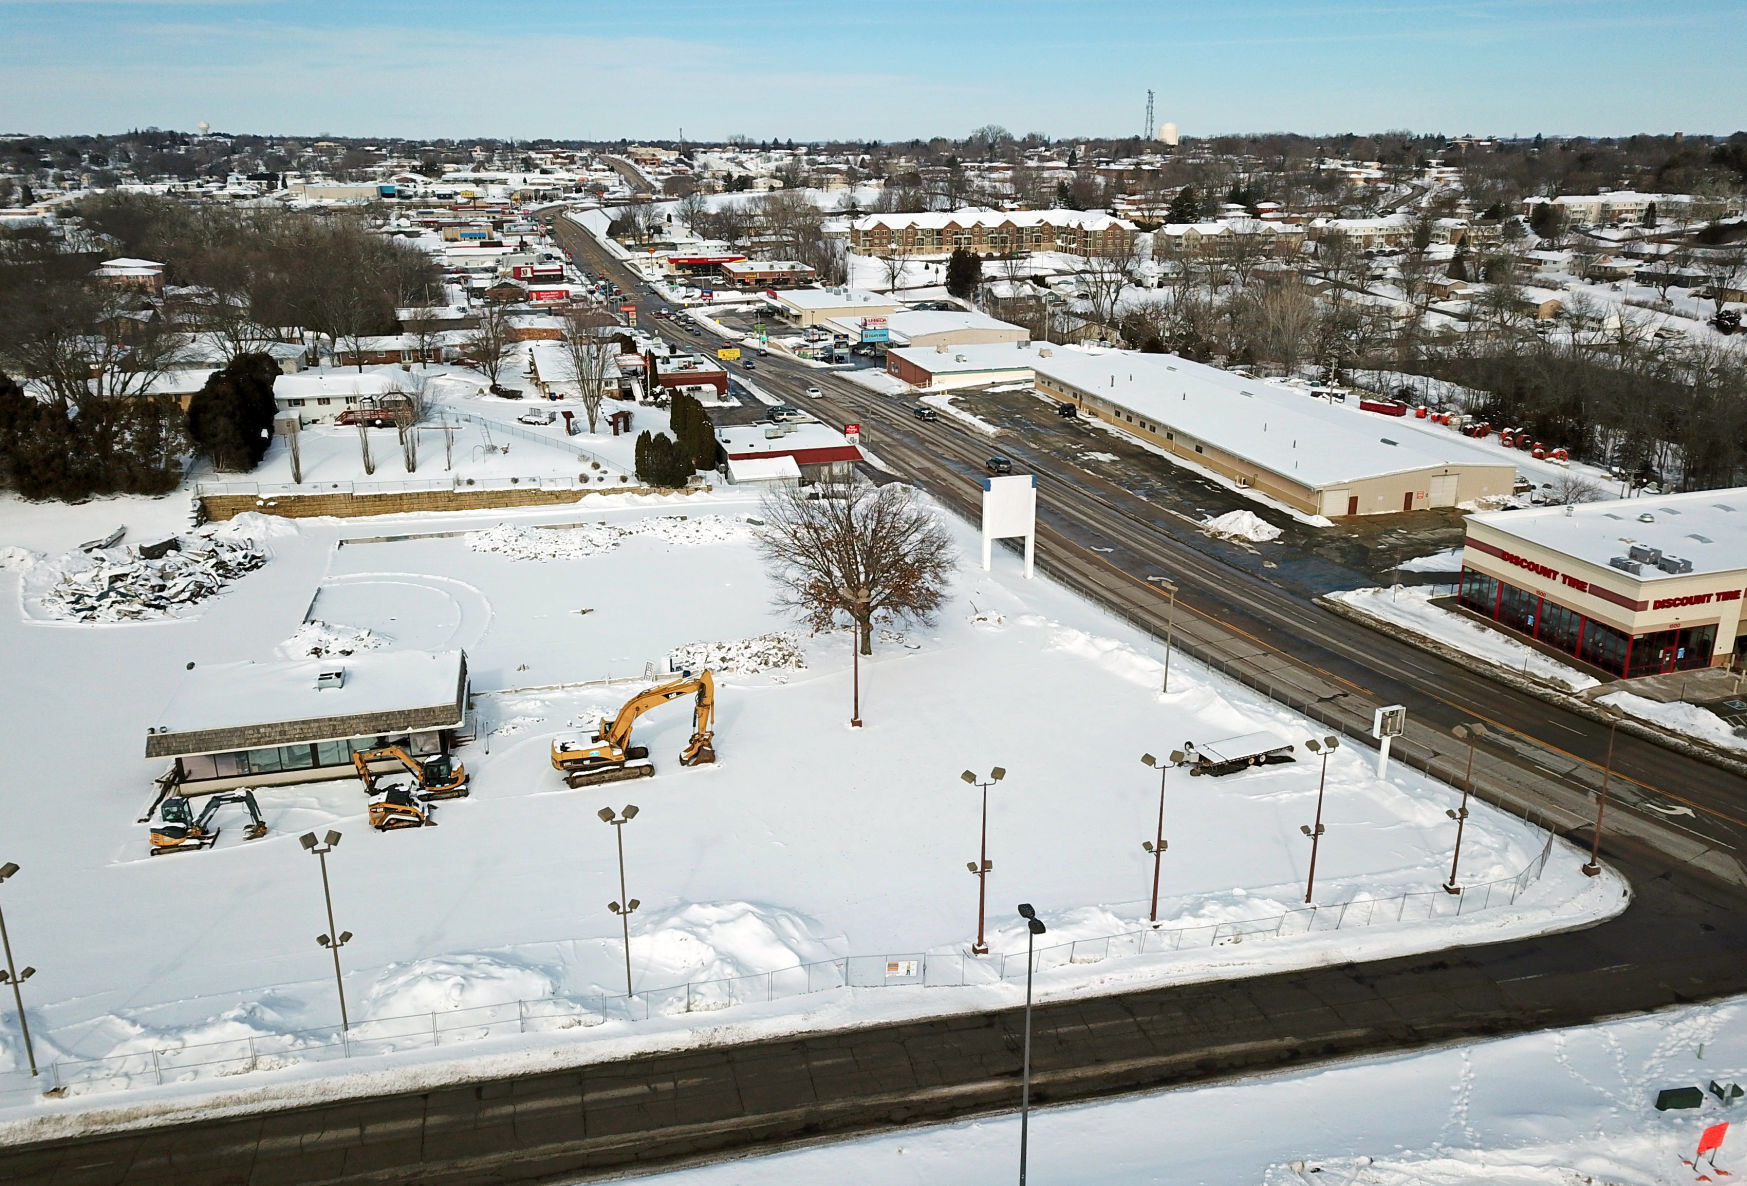 Crews recently demolished the former site of Richardson Motors at 1475 John F. Kennedy Road in Dubuque. Officials with GreenState Credit Union have confirmed plans to build a new branch location on the site. Photo taken Tuesday, Feb. 16, 2021. PHOTO CREDIT: JESSICA REILLY